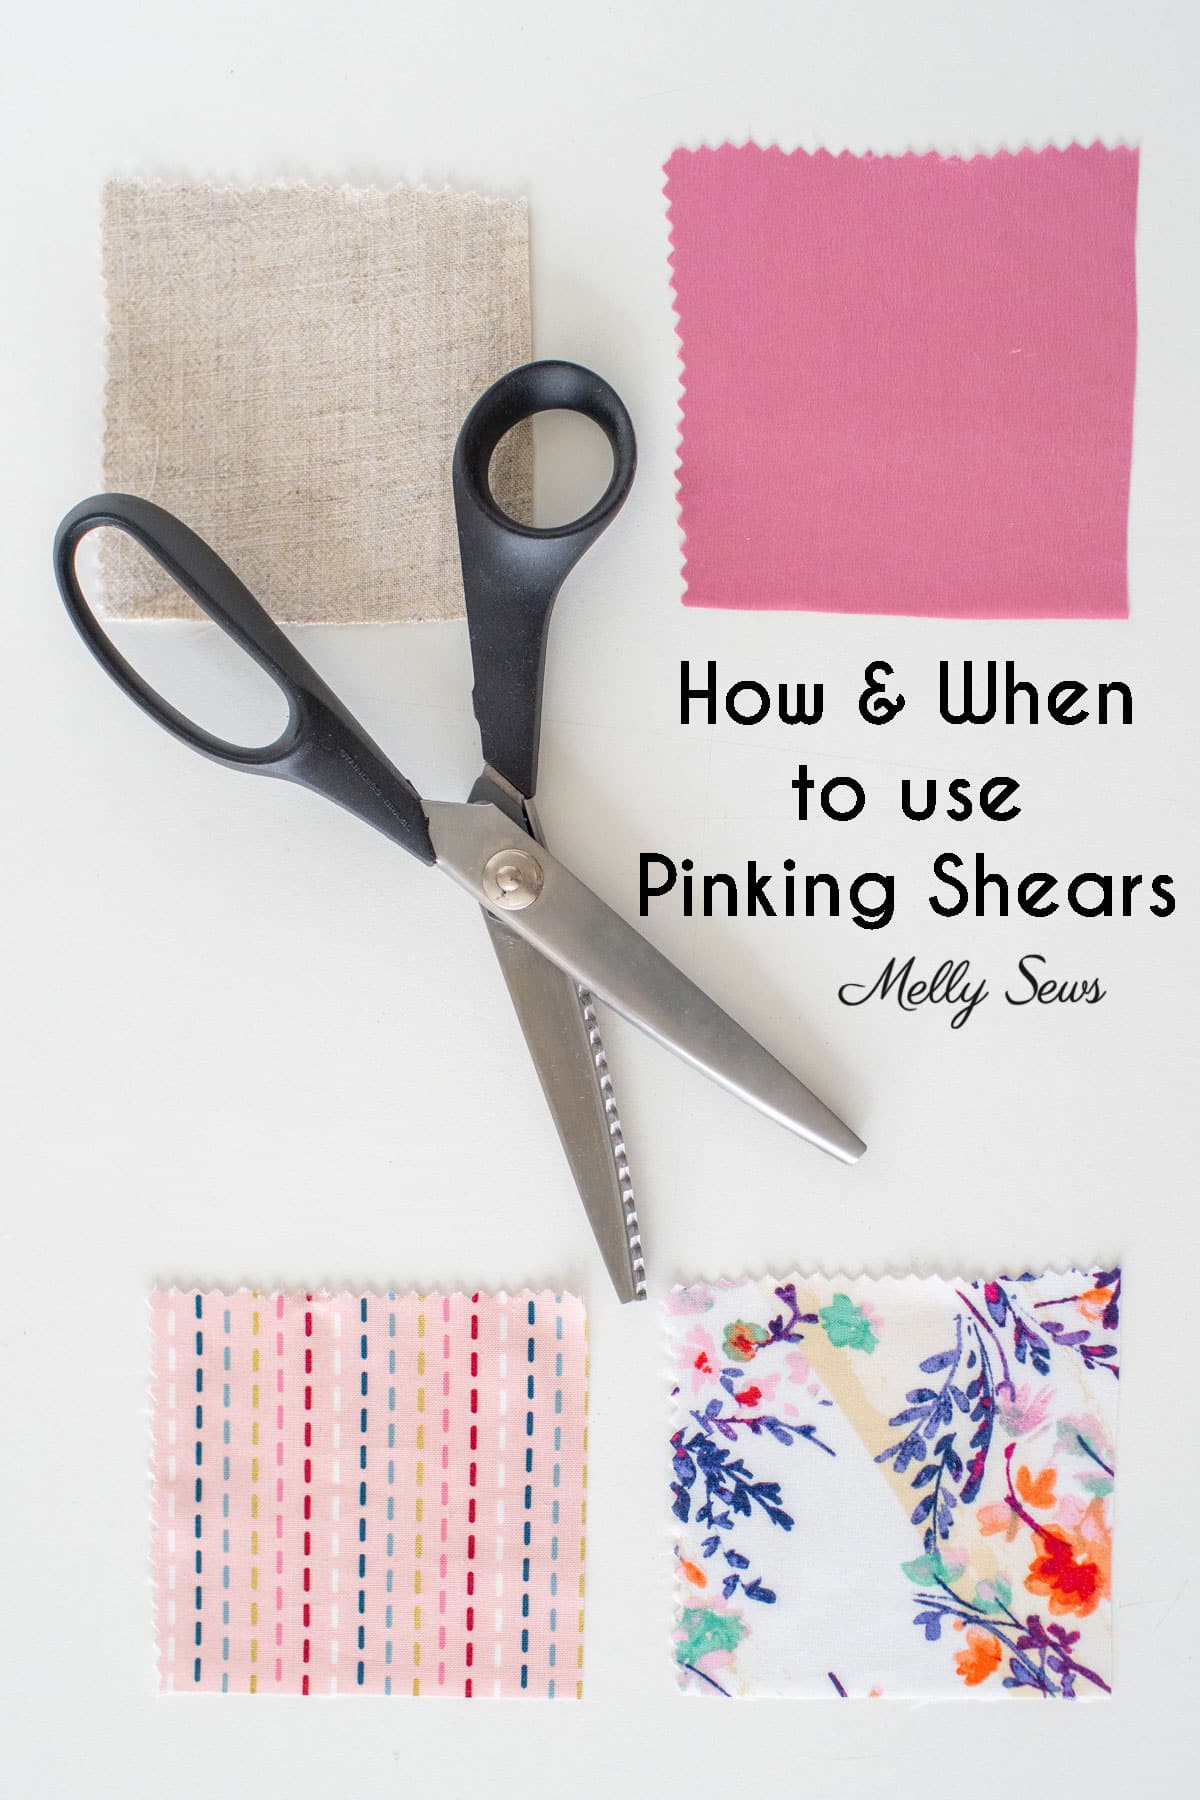 The easiest way to cut the lace off! Use “pinking” shears (I know I pr